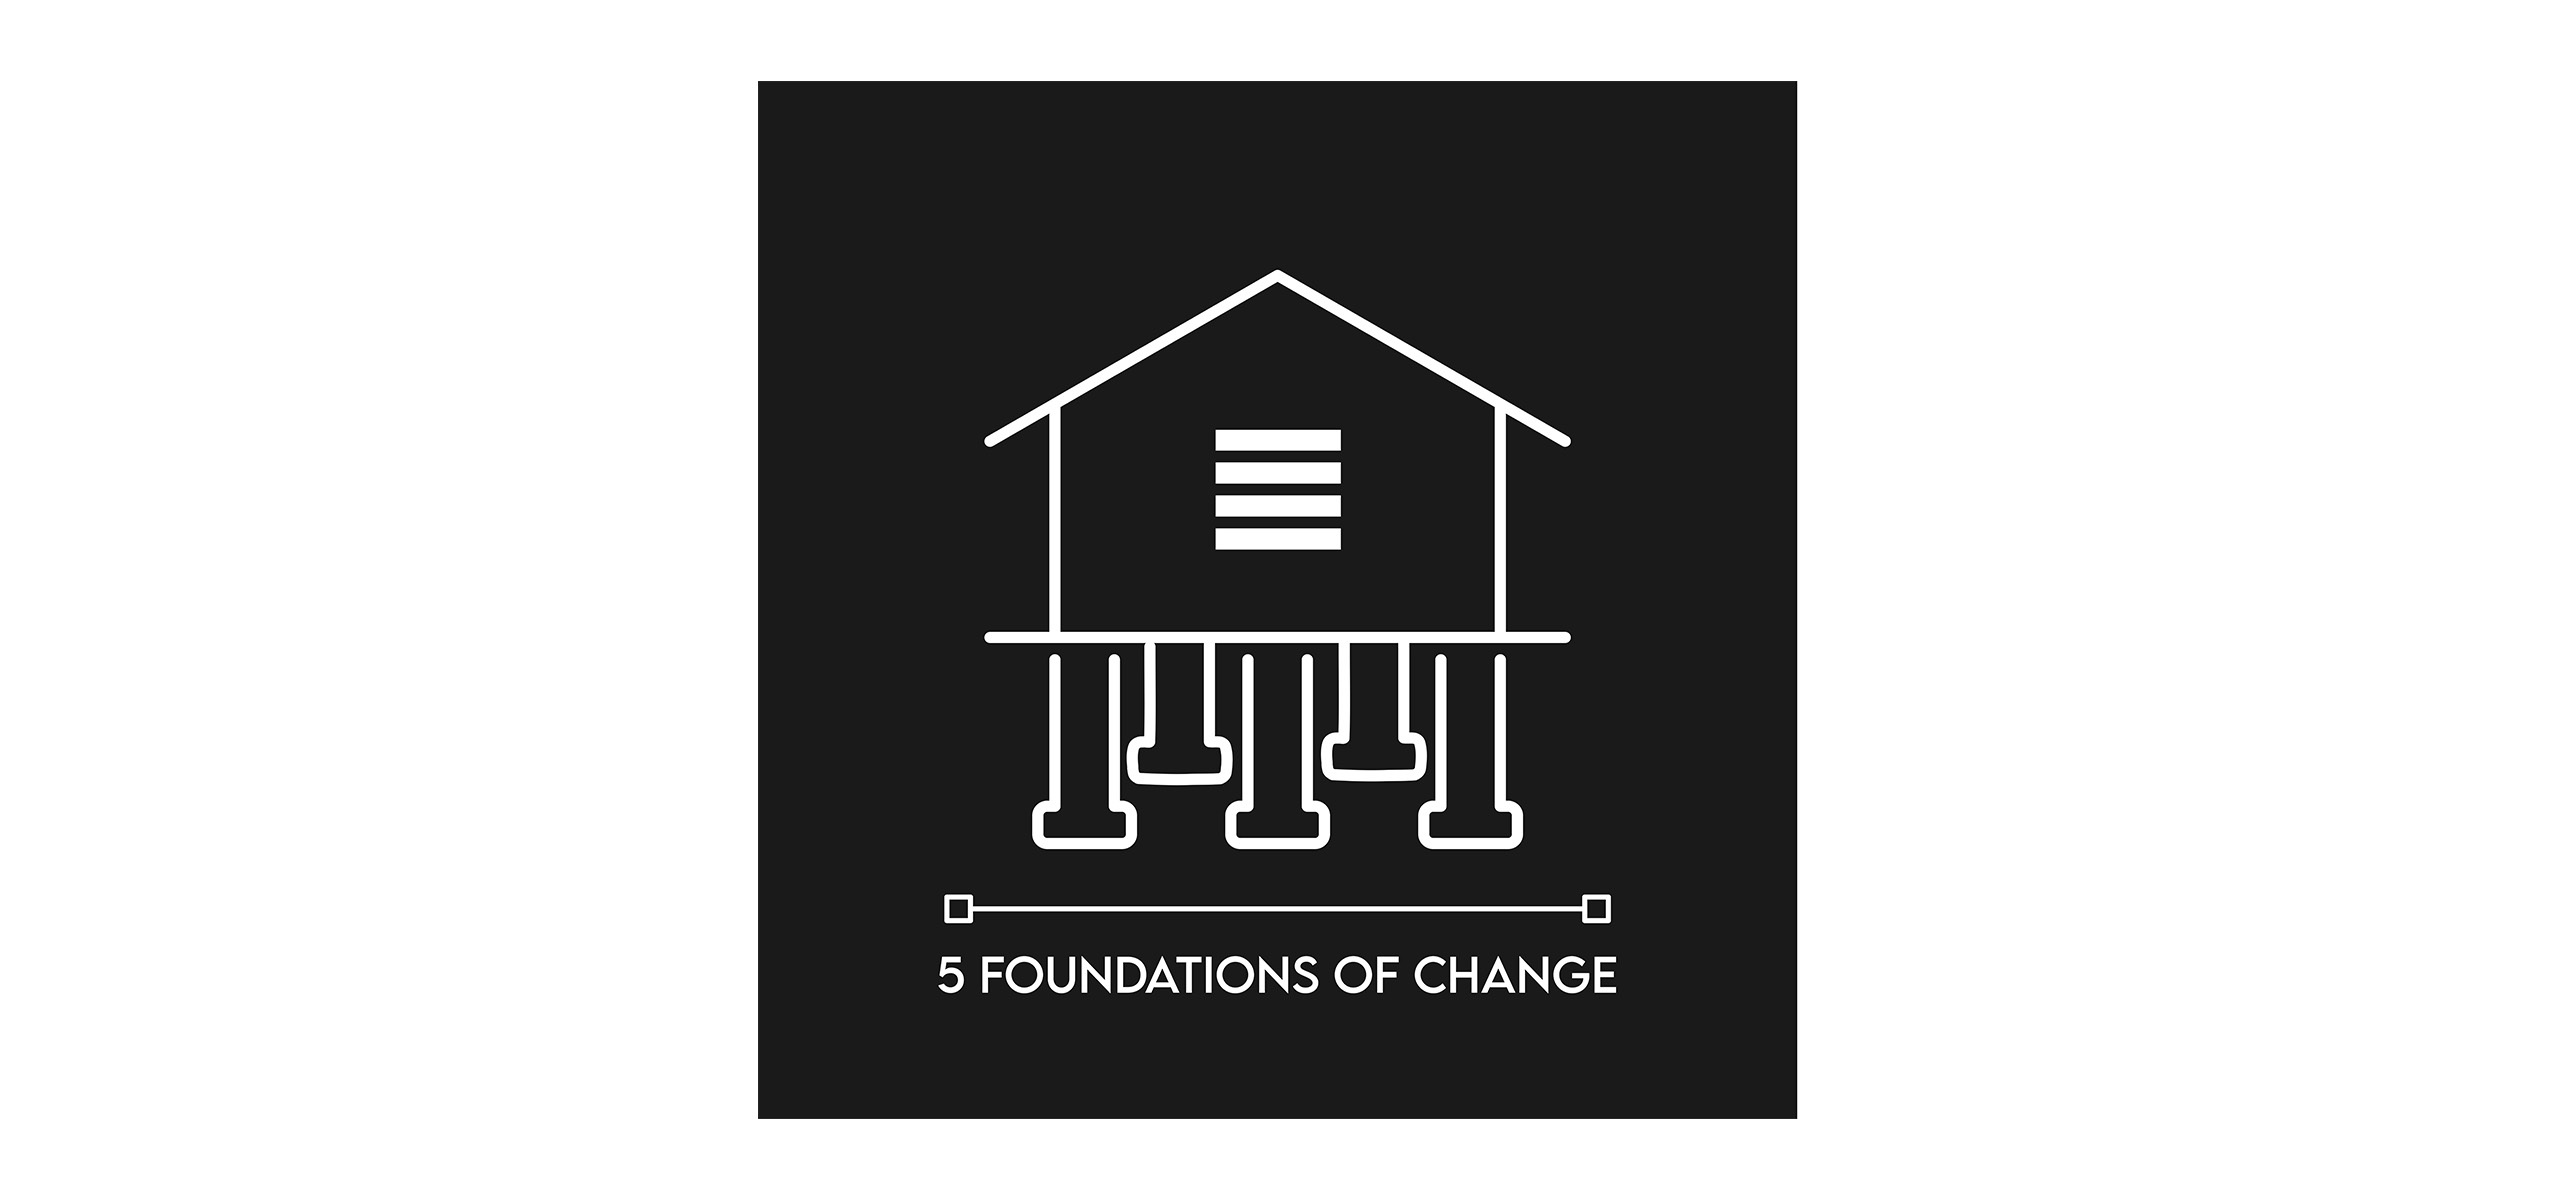 Foundations of Change